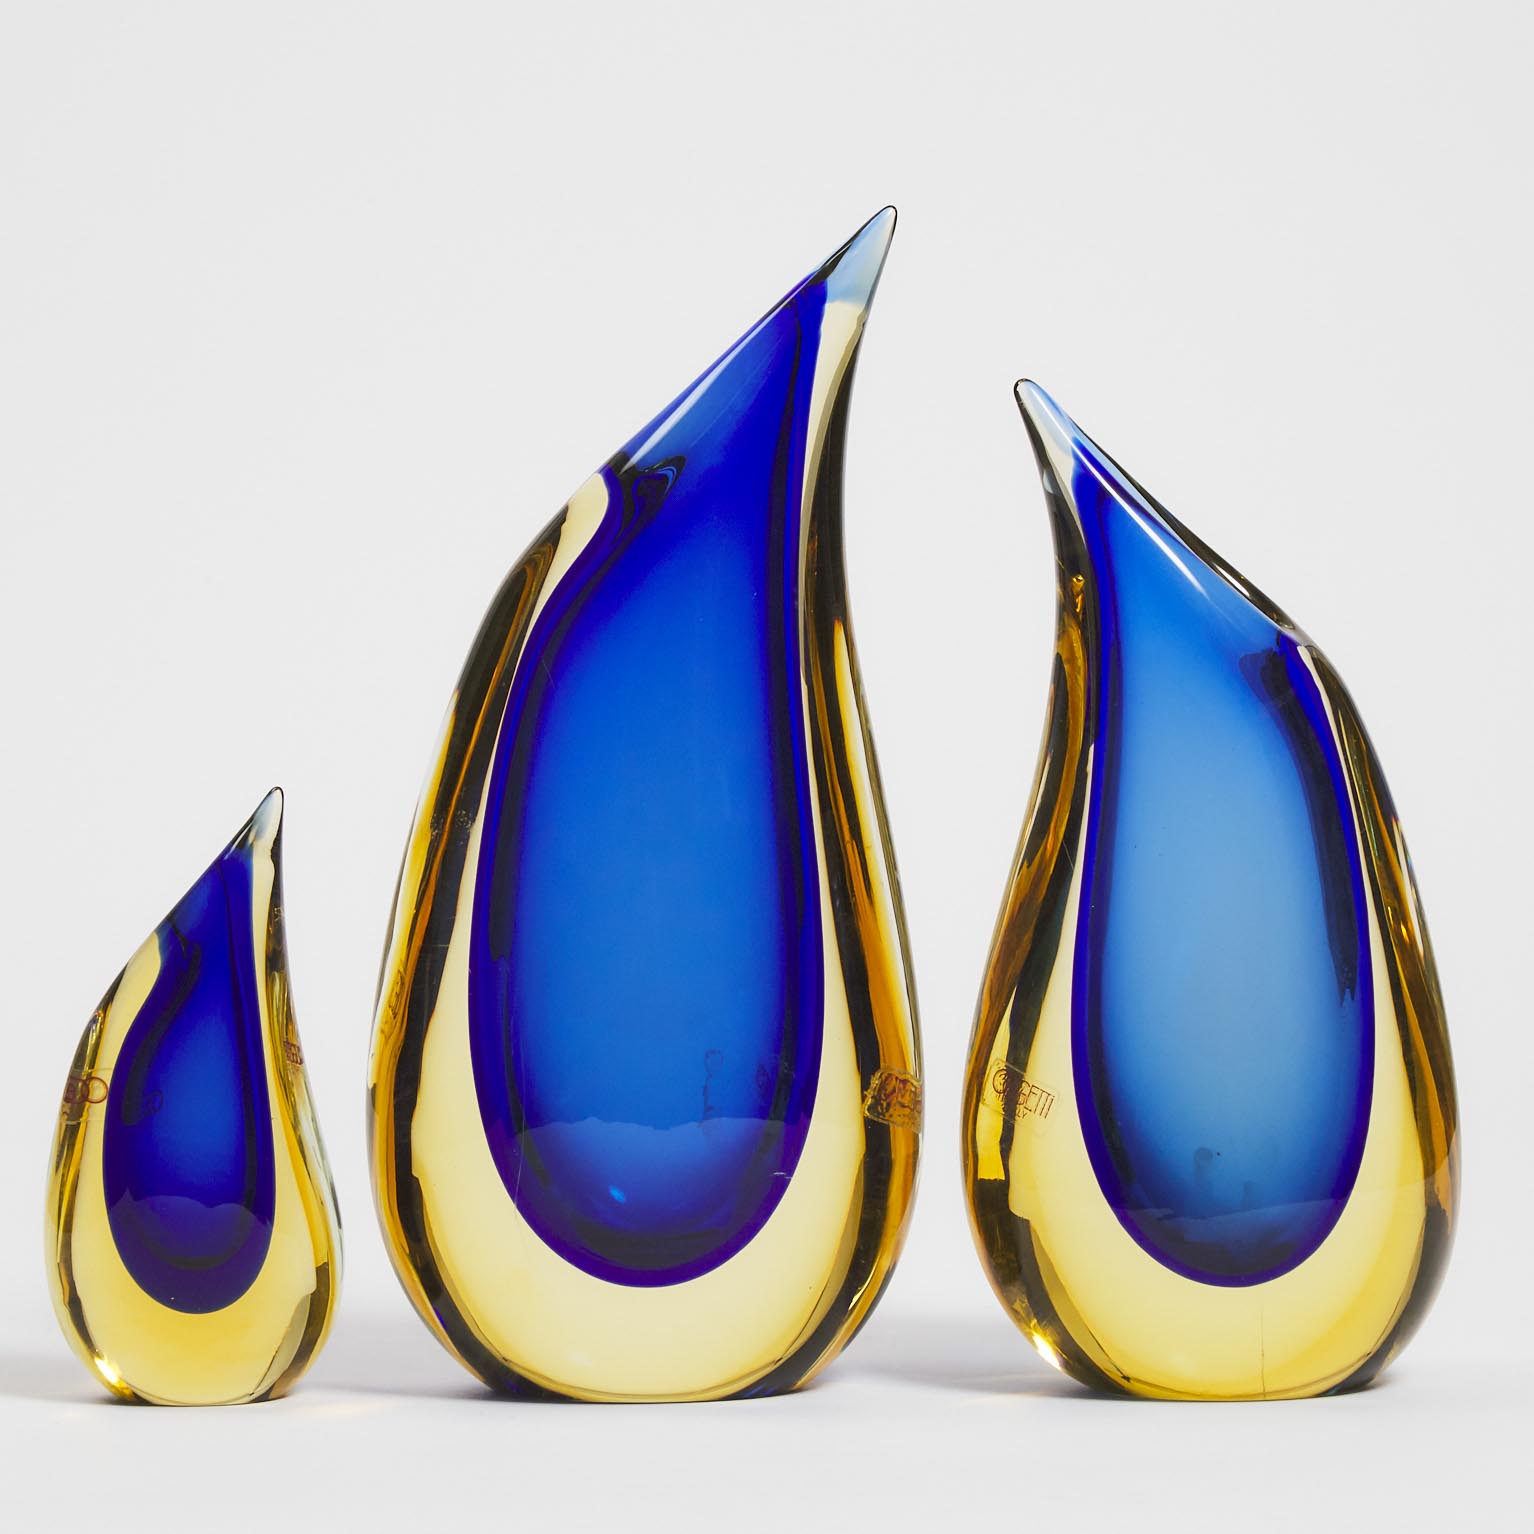 Group of Three Murano Sommerso 3ac041